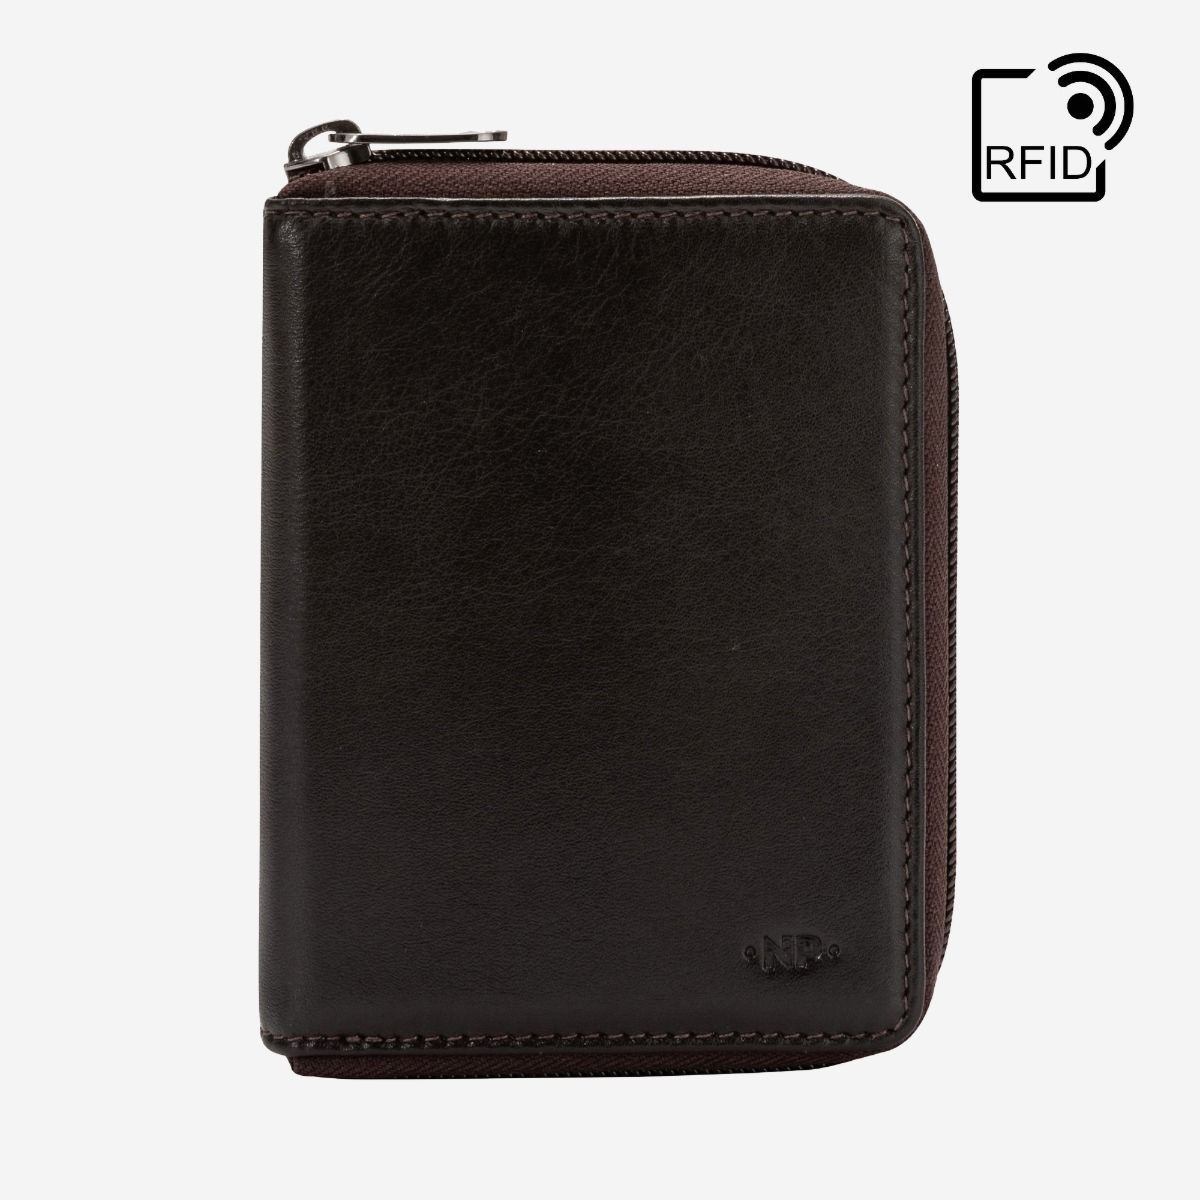 Nuvola Pelle Small Men's Wallet in Genuine Nappa Leather with Coin Purse and Internal Zip Zipper